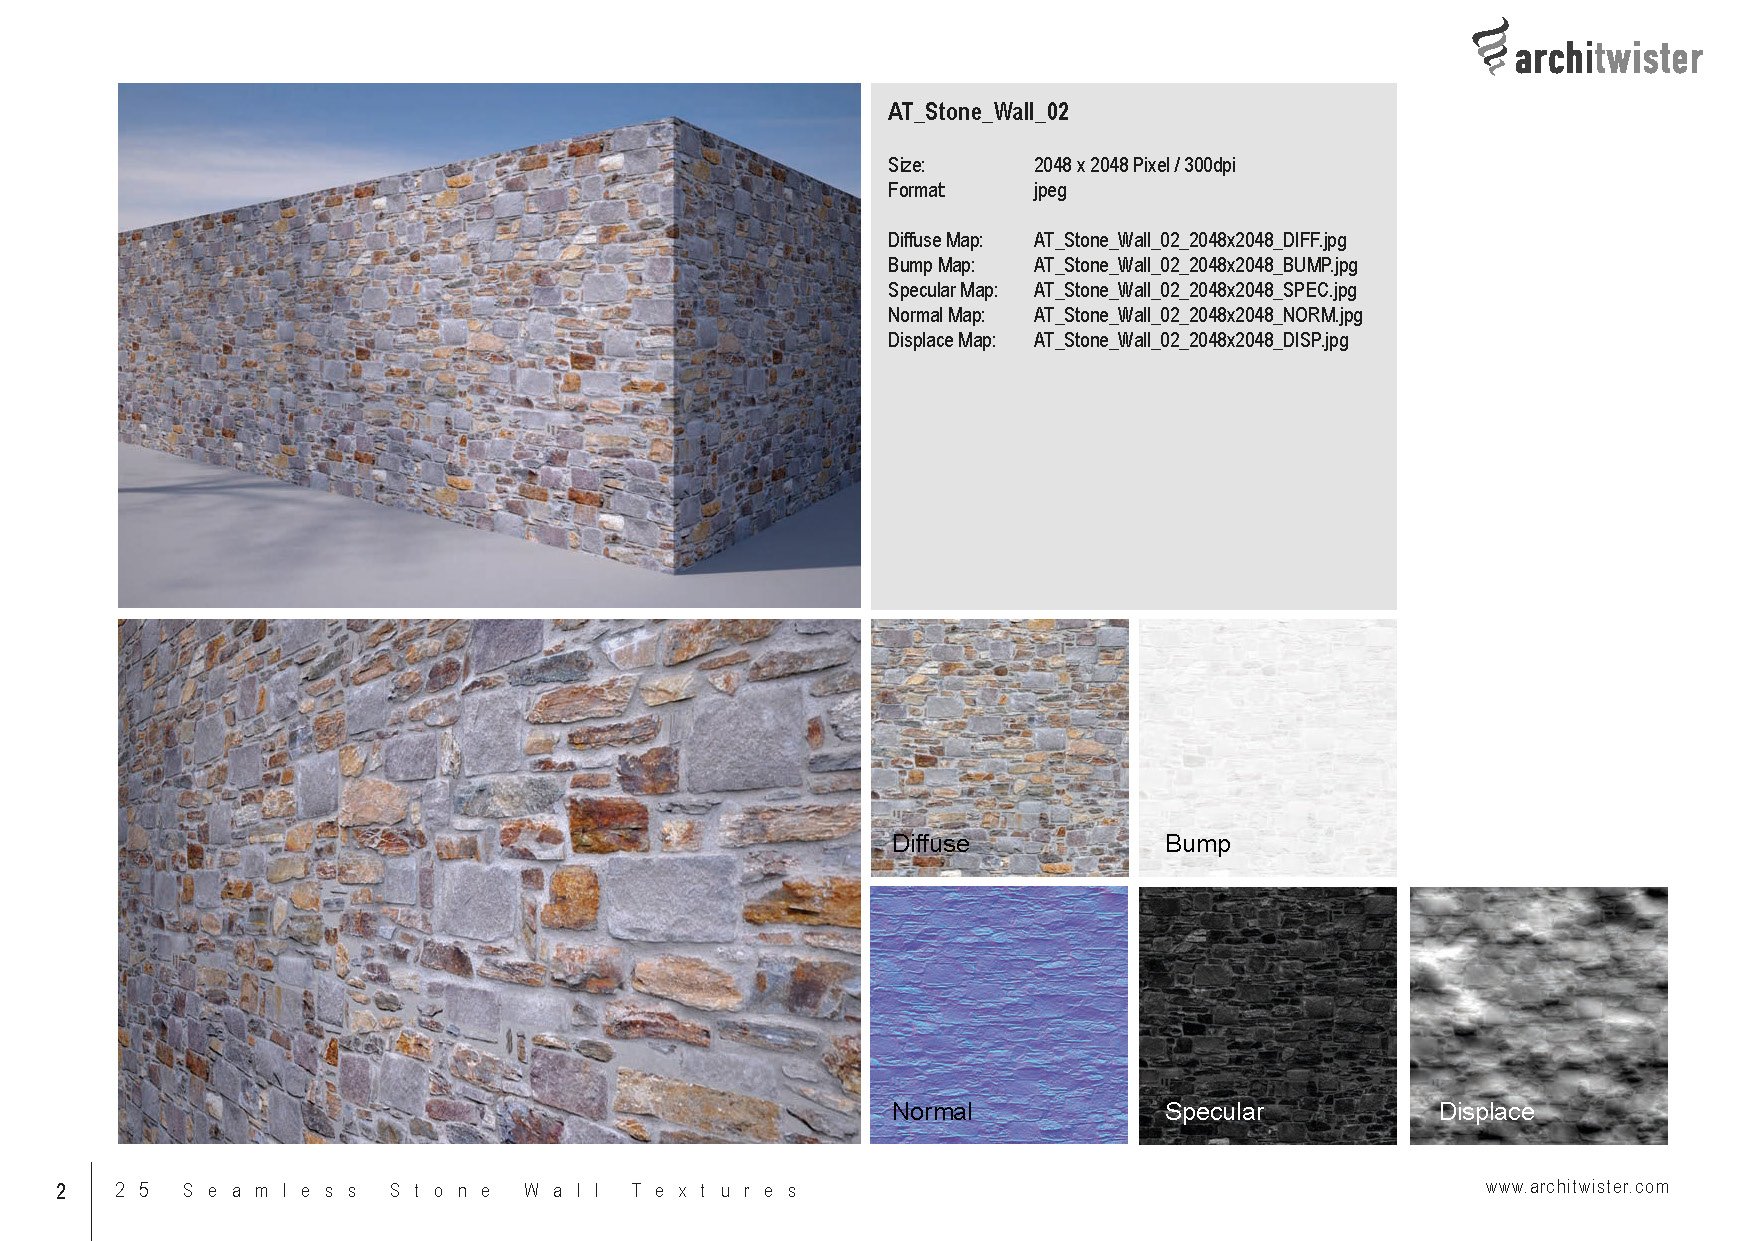 at stone wall textures catalog 01 seite 03 114